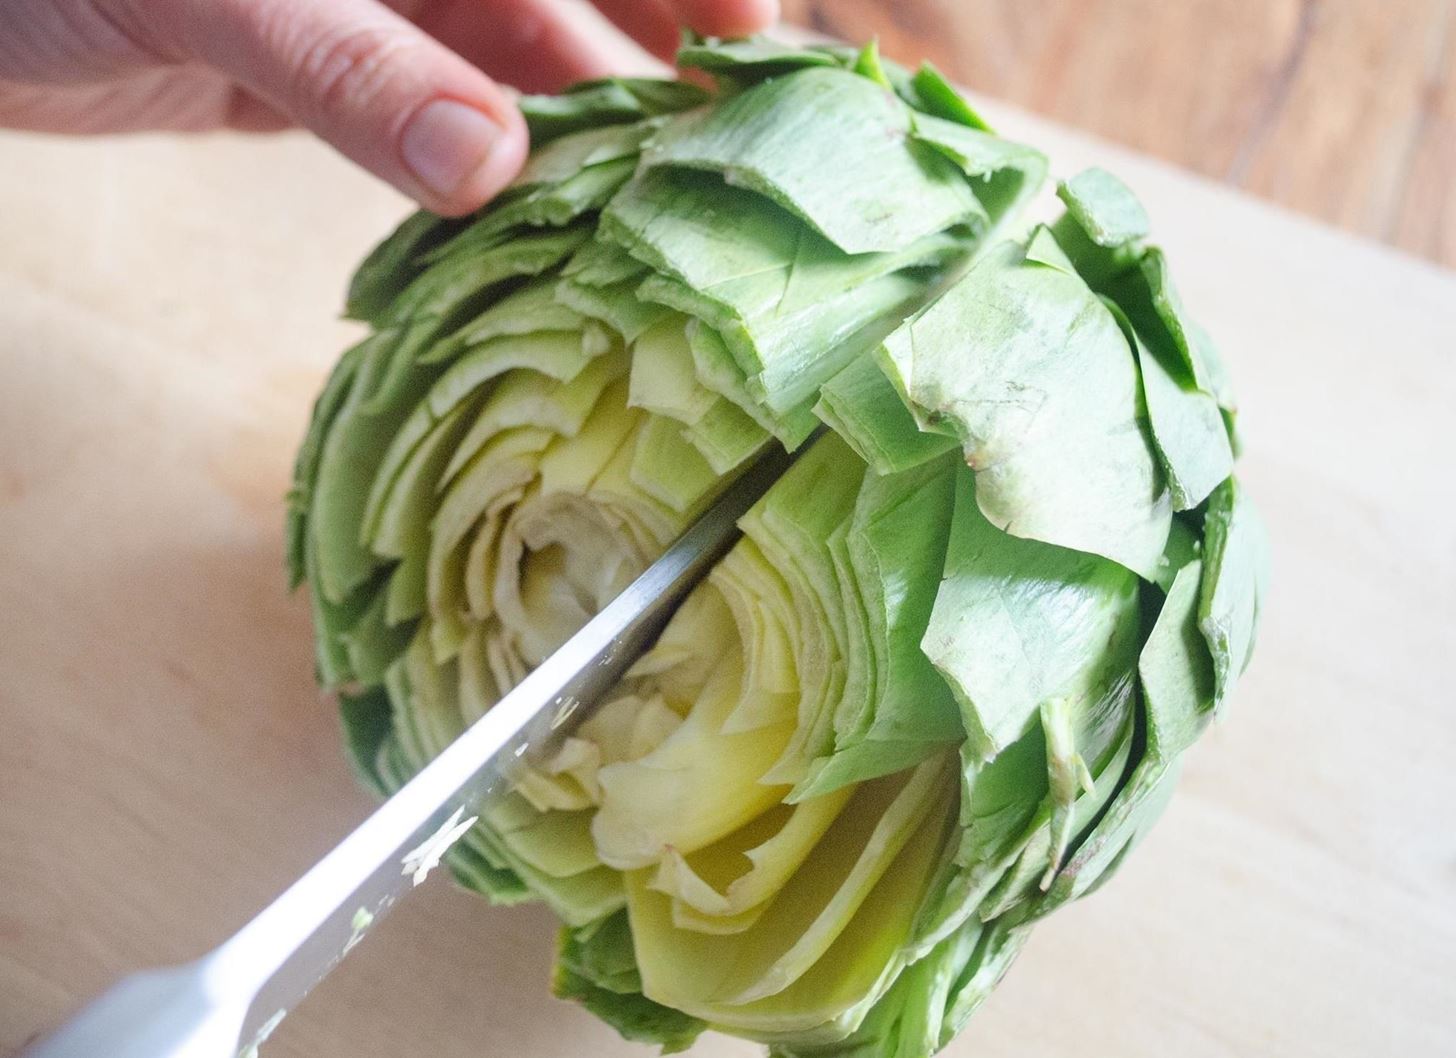 The Absolute Best Way to Prepare & Cook Artichokes